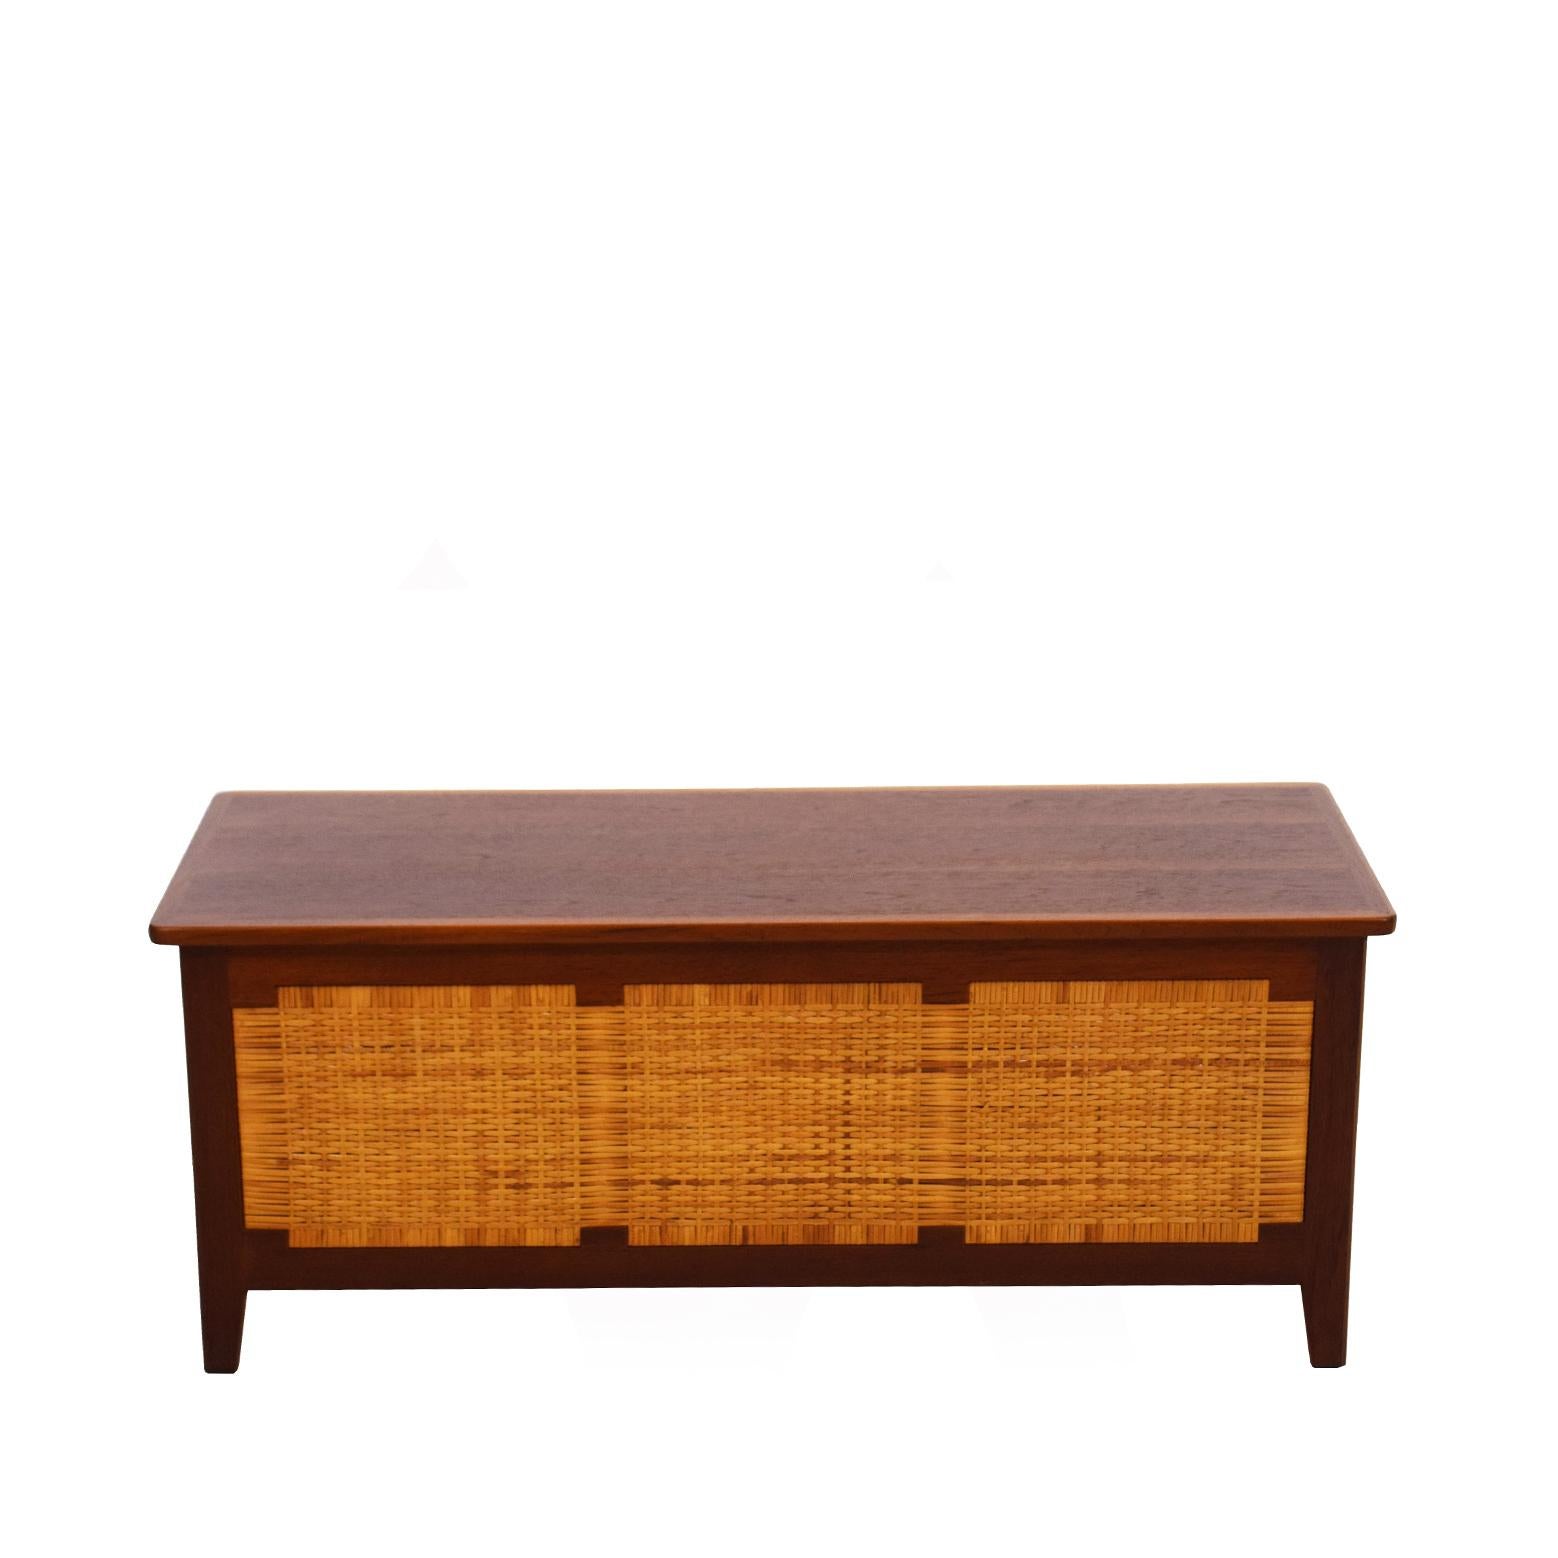 Solid teak coffee table / trunk /chest / bench design by Kai Winding for Poul Hundevad in 1950’s

with caning on all sides.